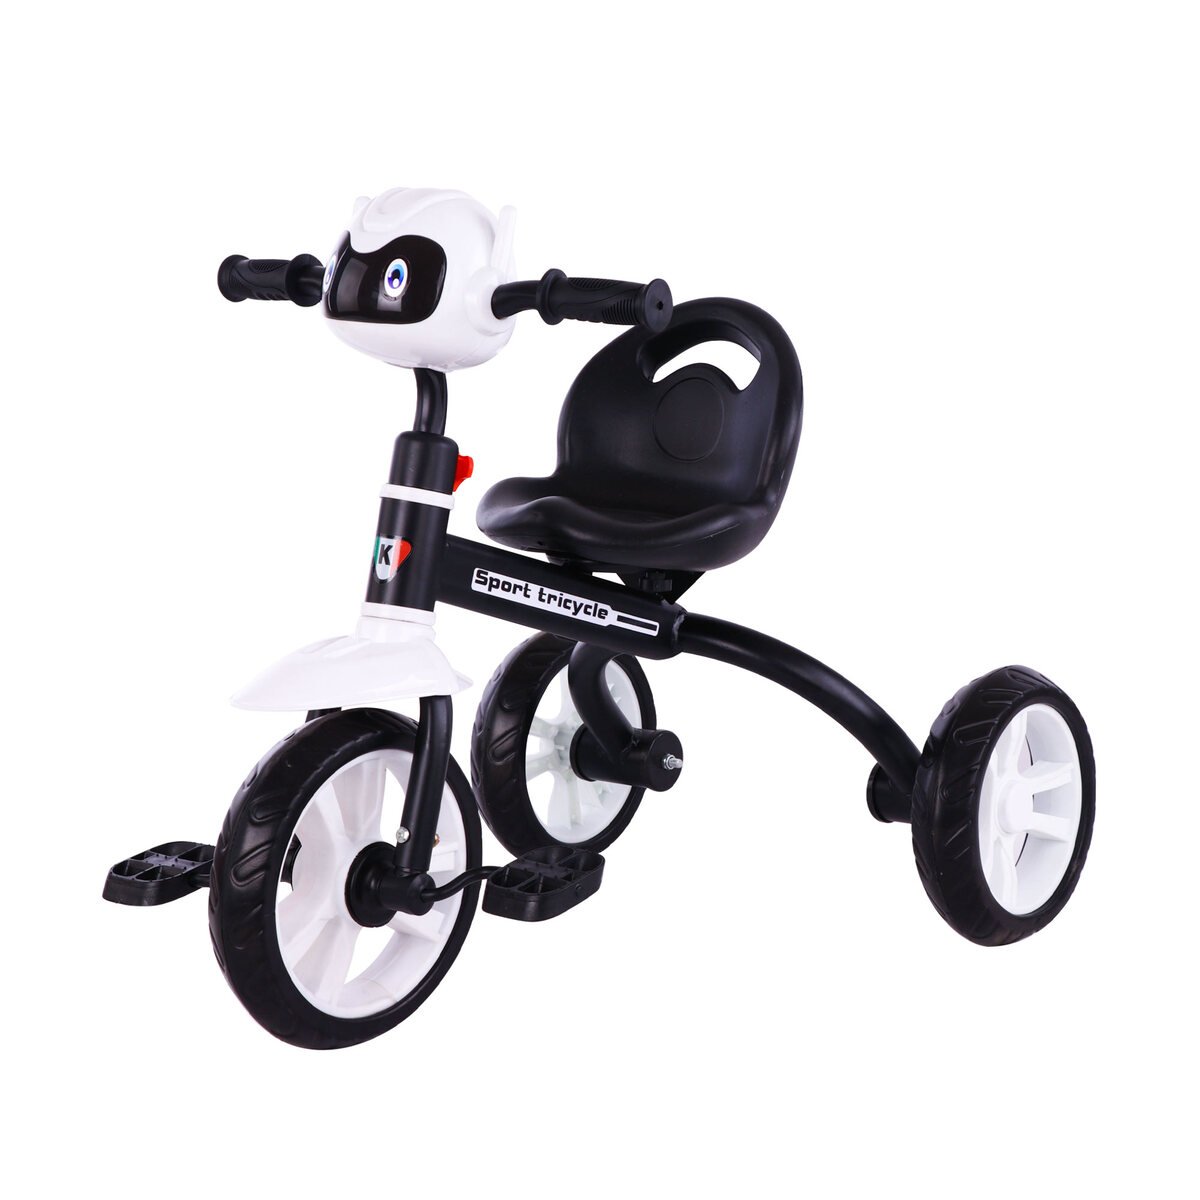 Skid Fusion Childrens Tricycle 5188 White